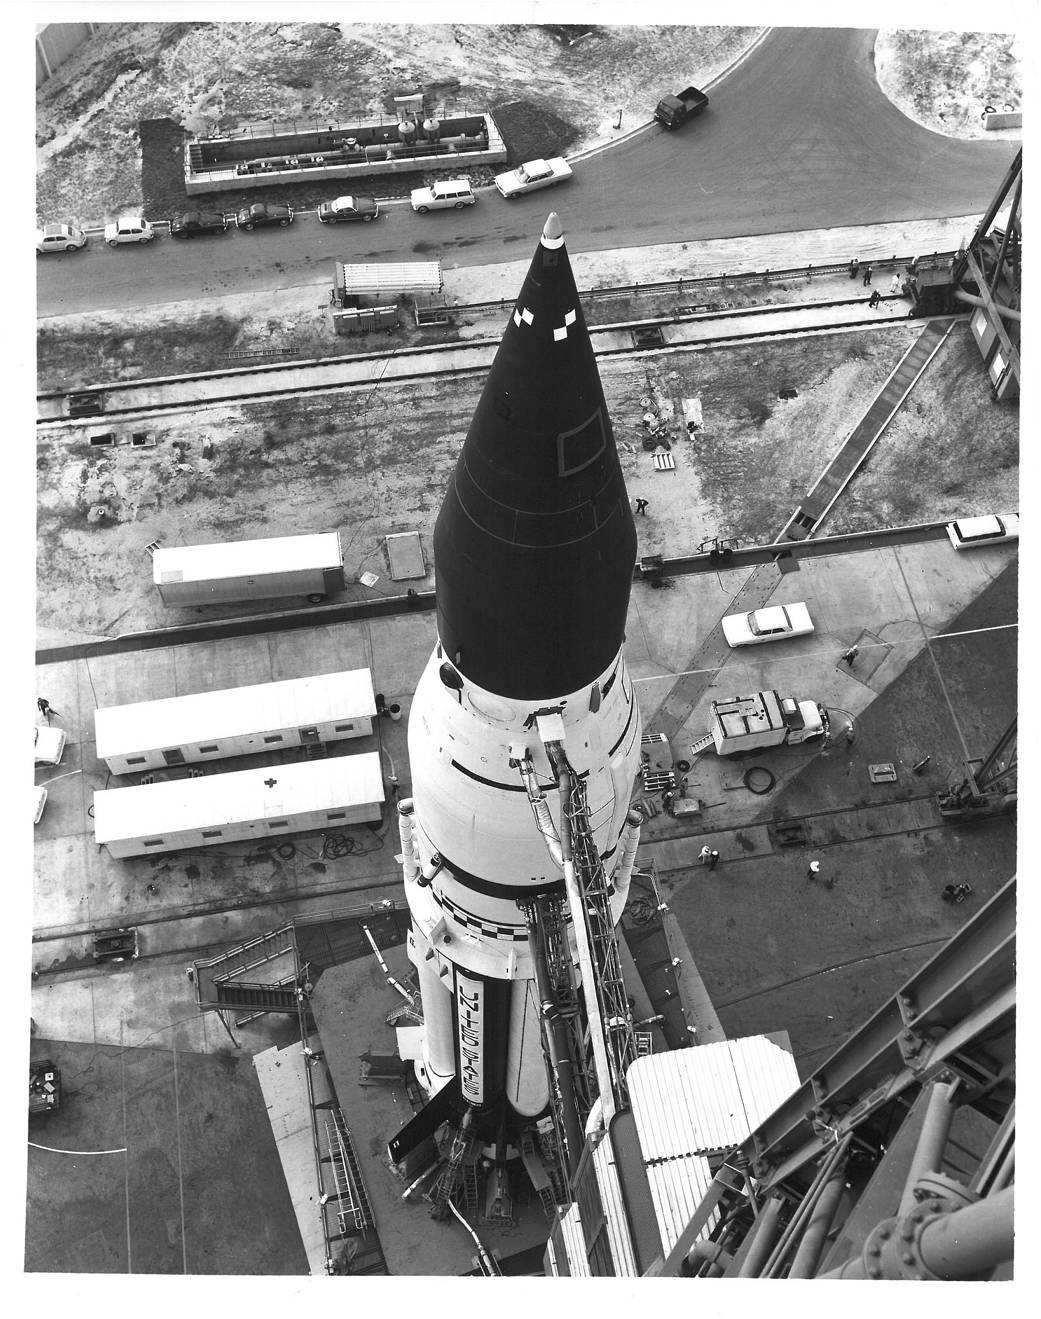 This week in 1964, SA-5, the fifth Saturn I launch vehicle launched from NASA's Kennedy Space Center.